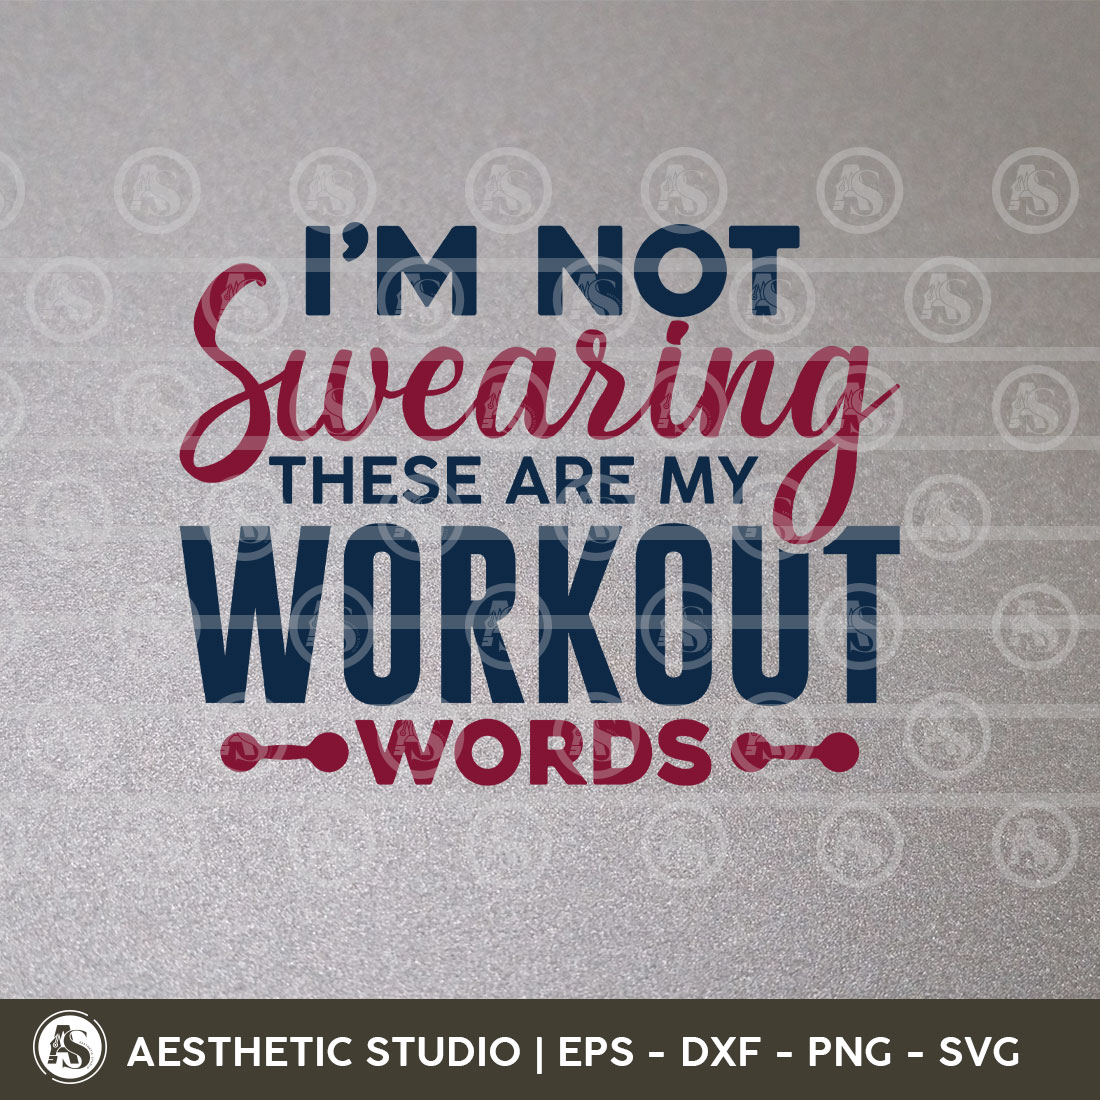 bt0001 im not swearing these are my workout words 01 809